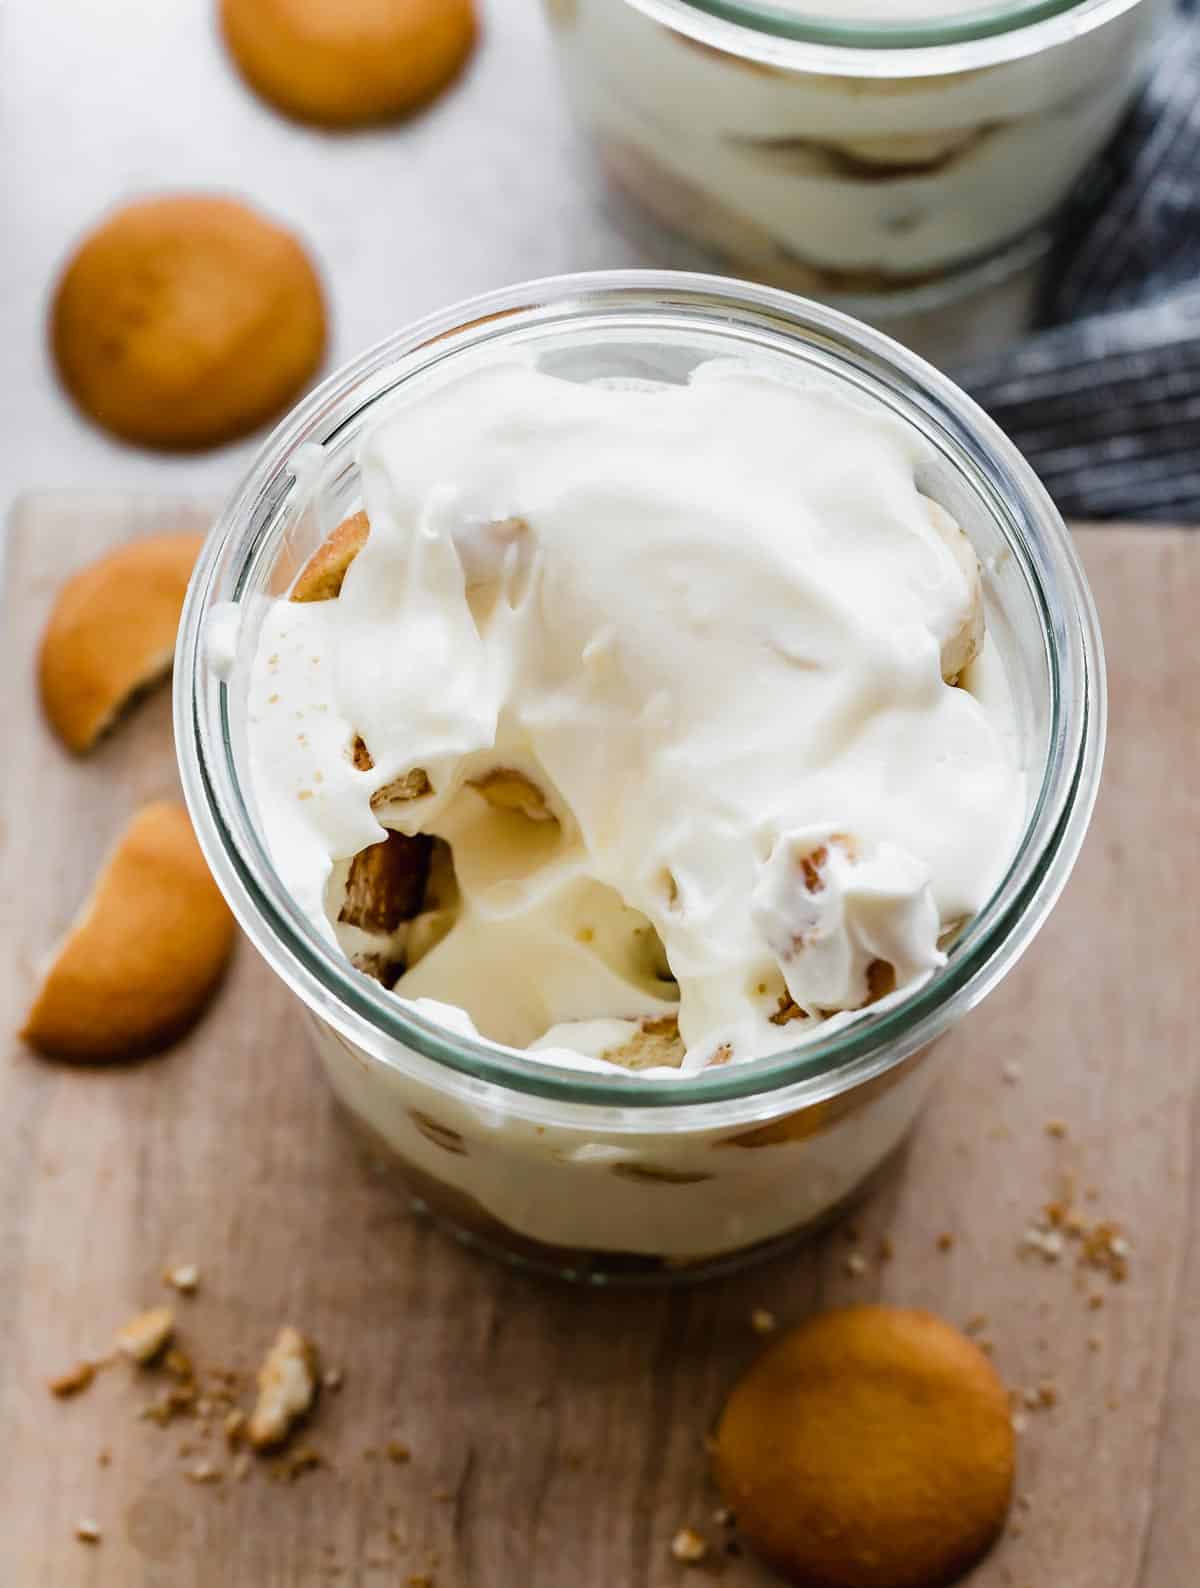 Overhead photo of Magnolia Bakery Banana Pudding in a glass jar on a wooden background.